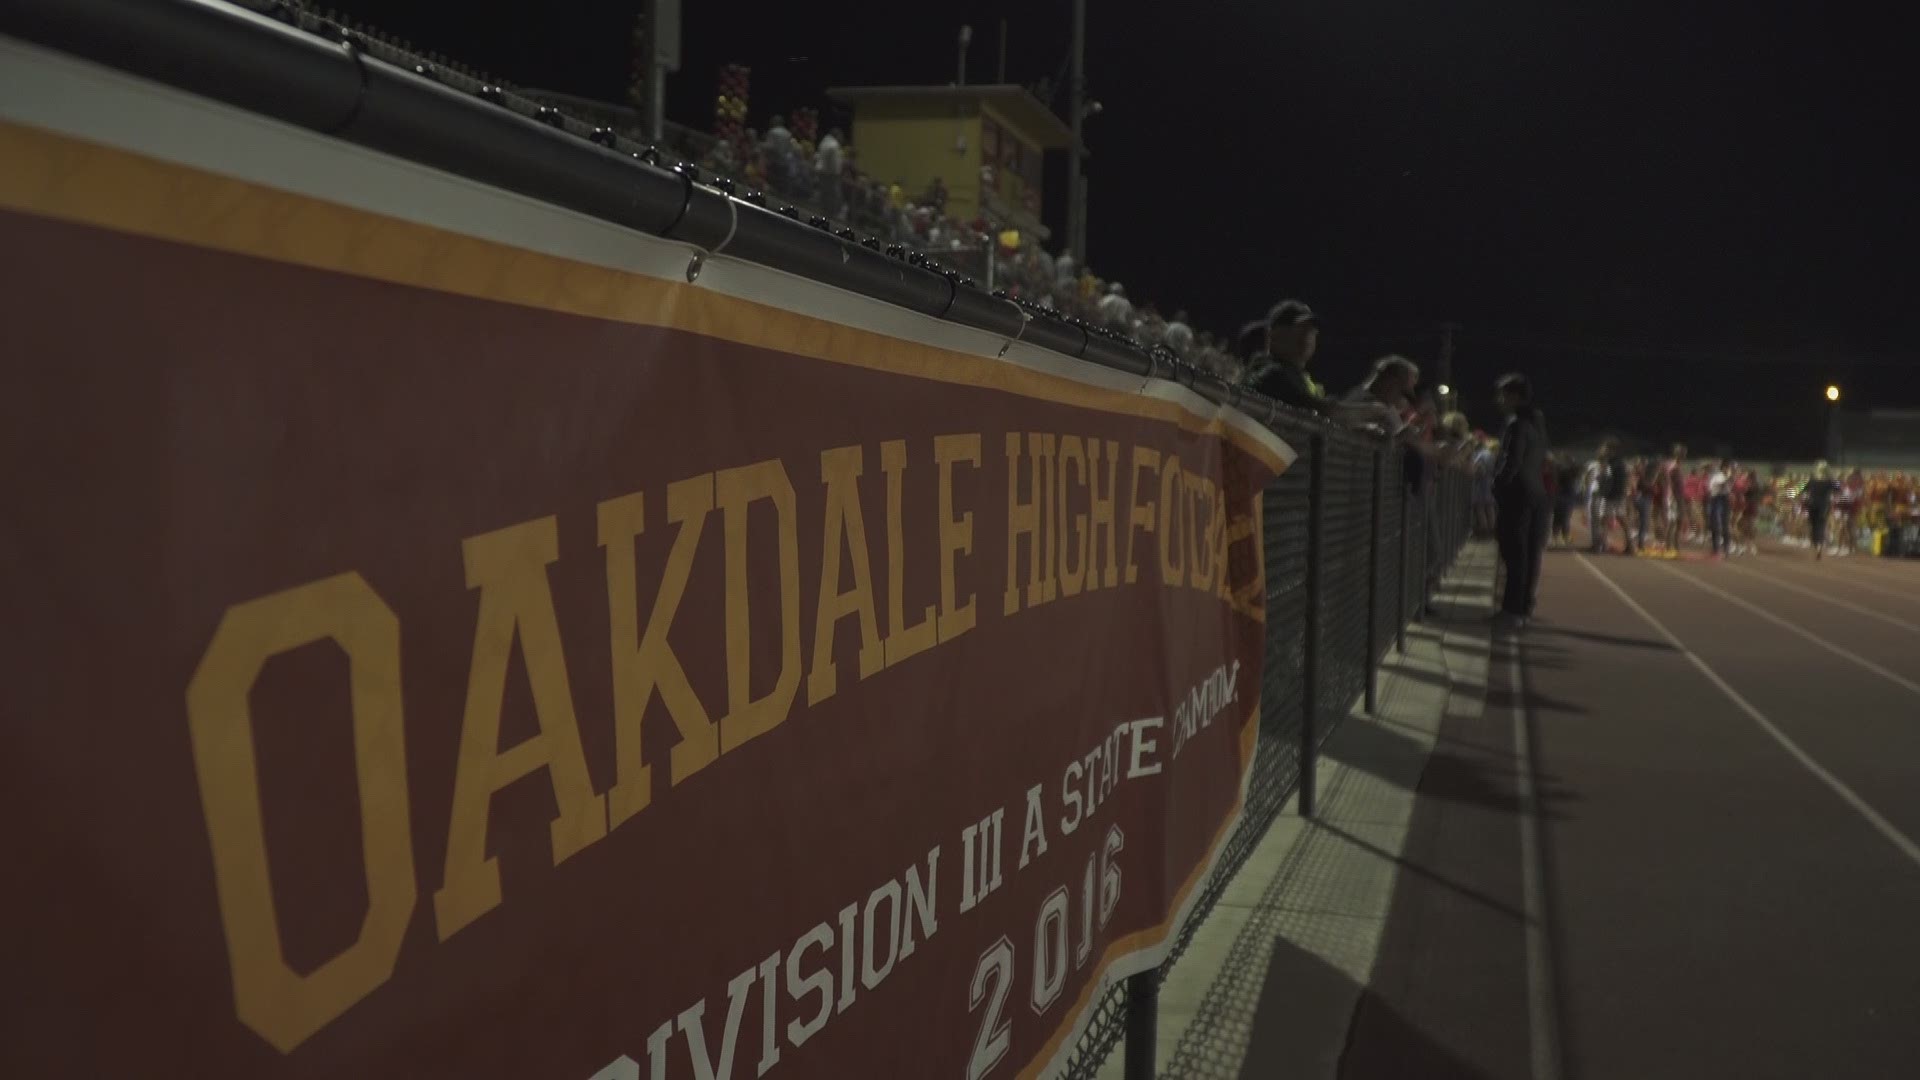 Our Fan Game of the Week takes us to Oakdale where the Mustangs pulled off a big win over the Kimball Jaguars.